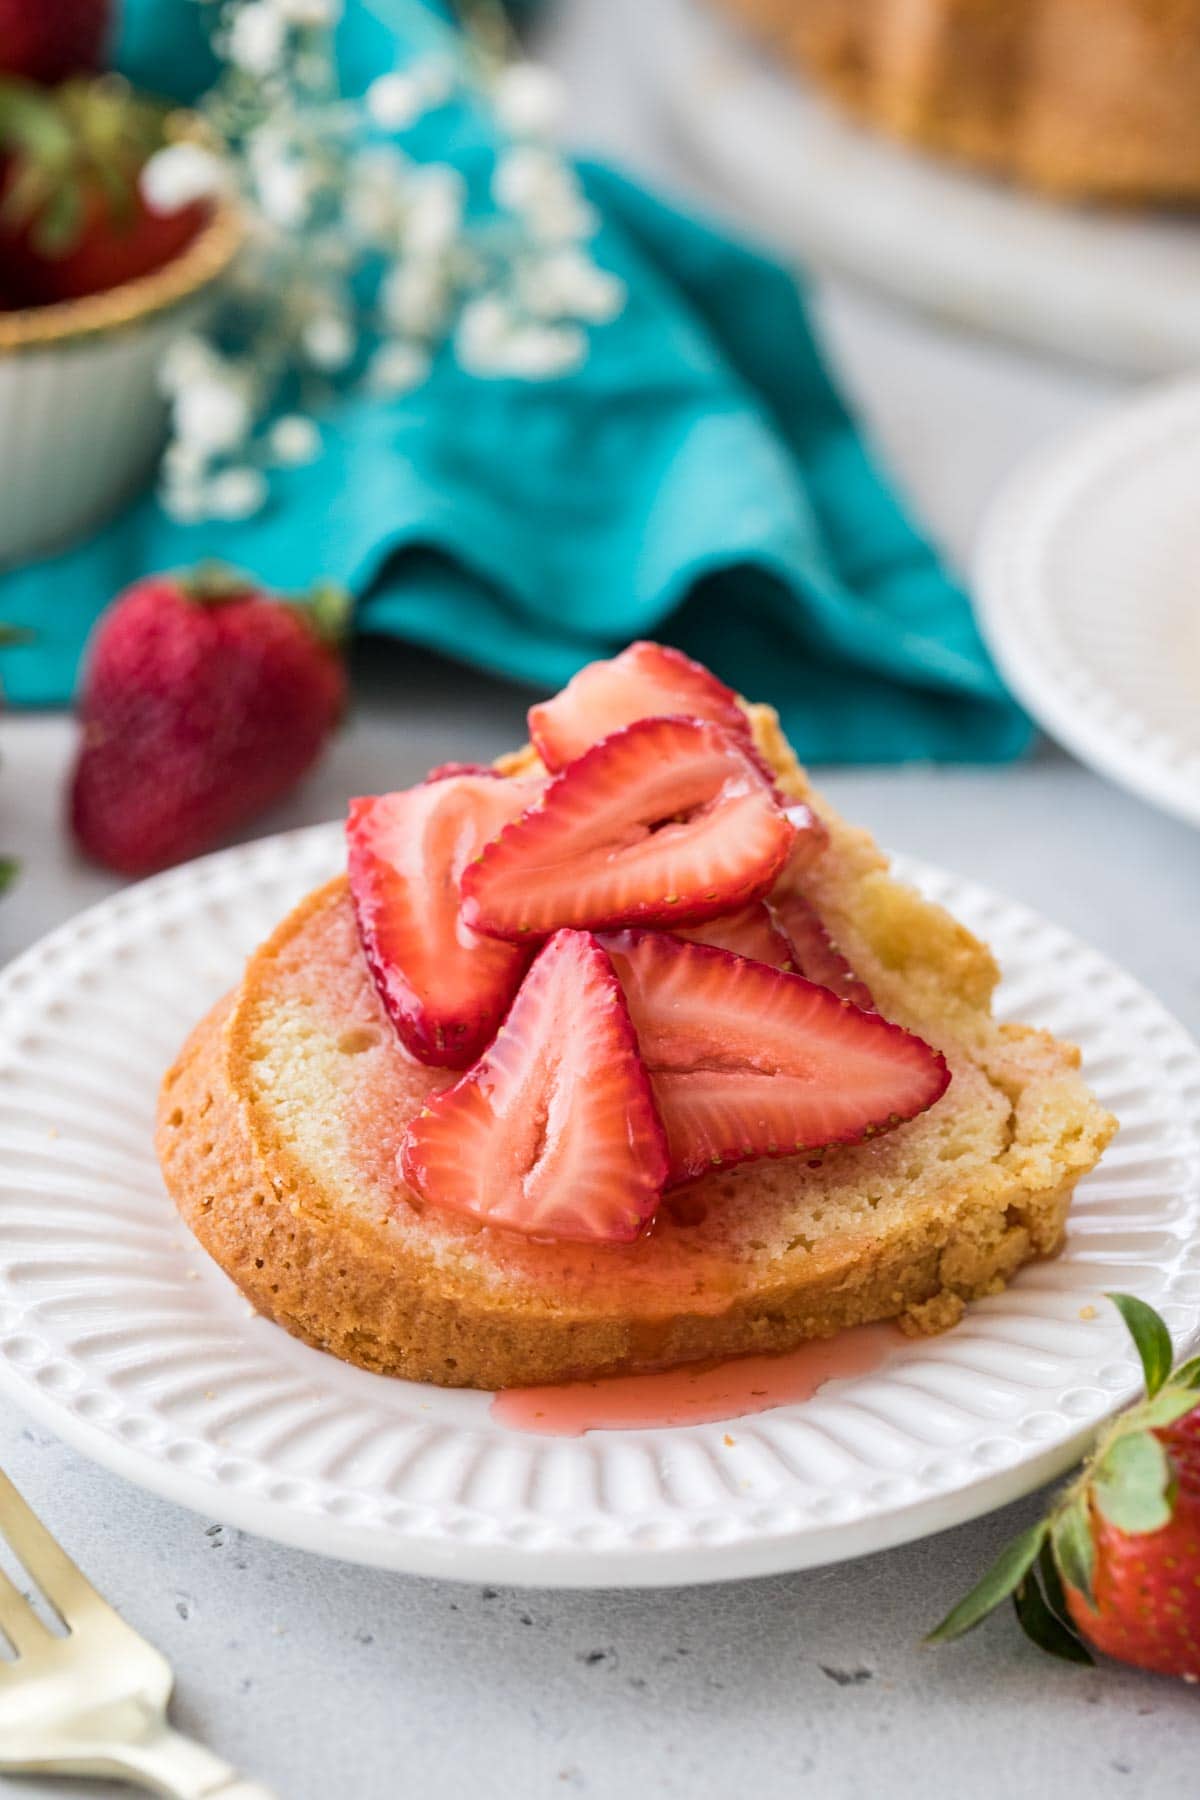 slice of pound cake topped with syrupy sliced strawberries